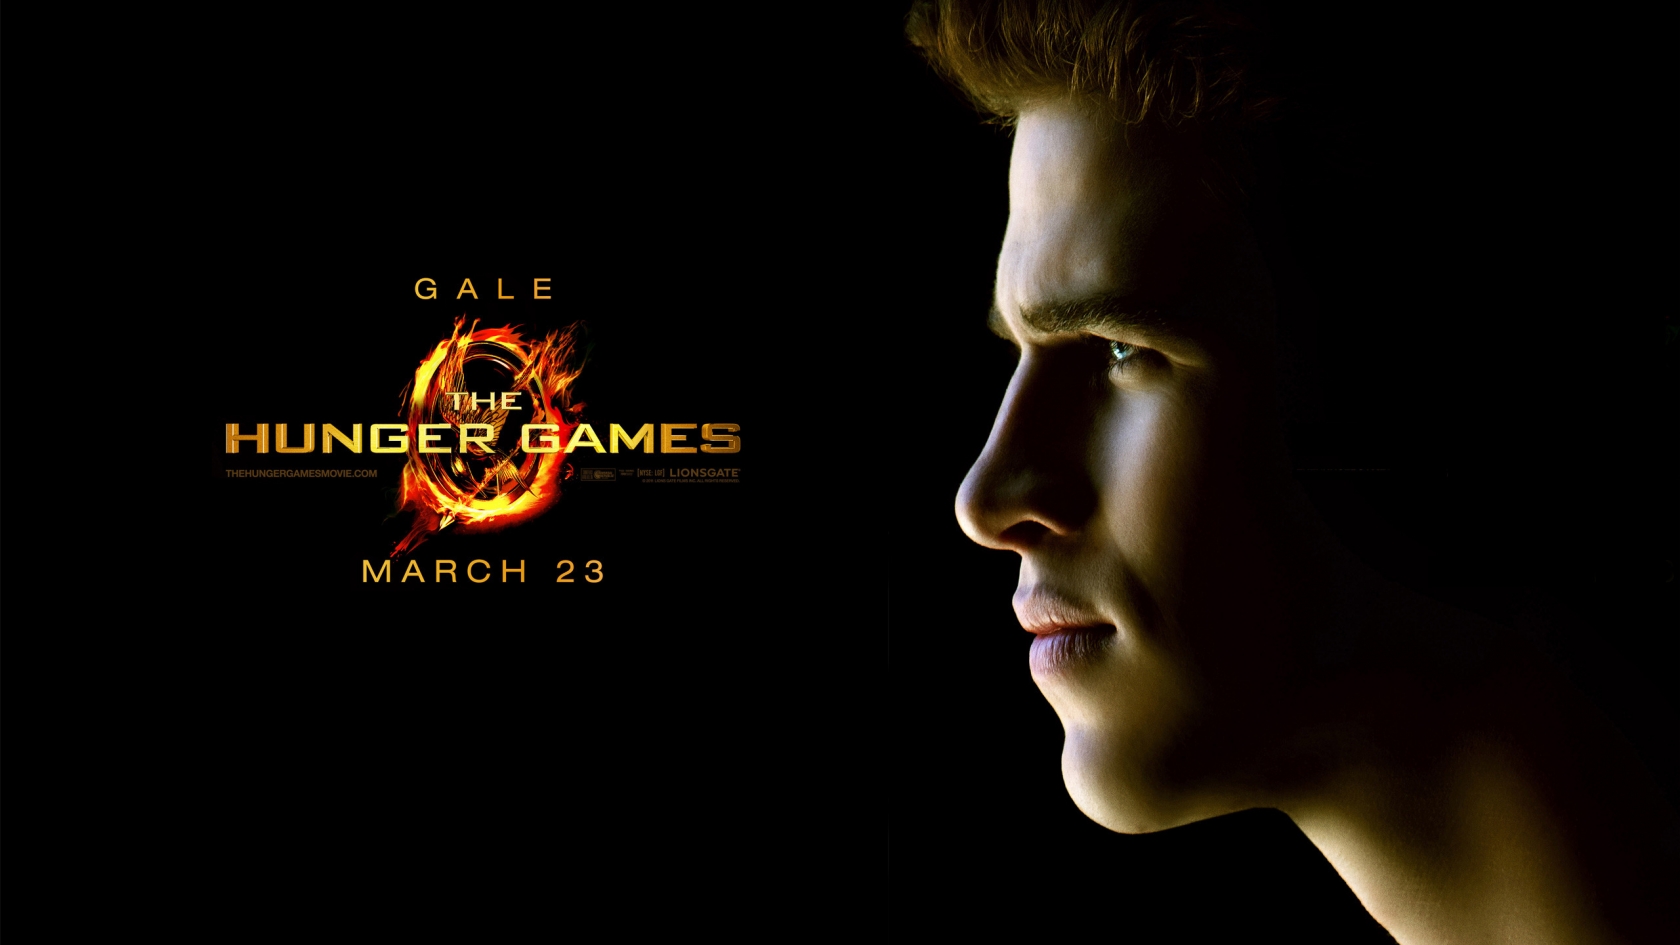 The Hunger Games Gale for 1680 x 945 HDTV resolution